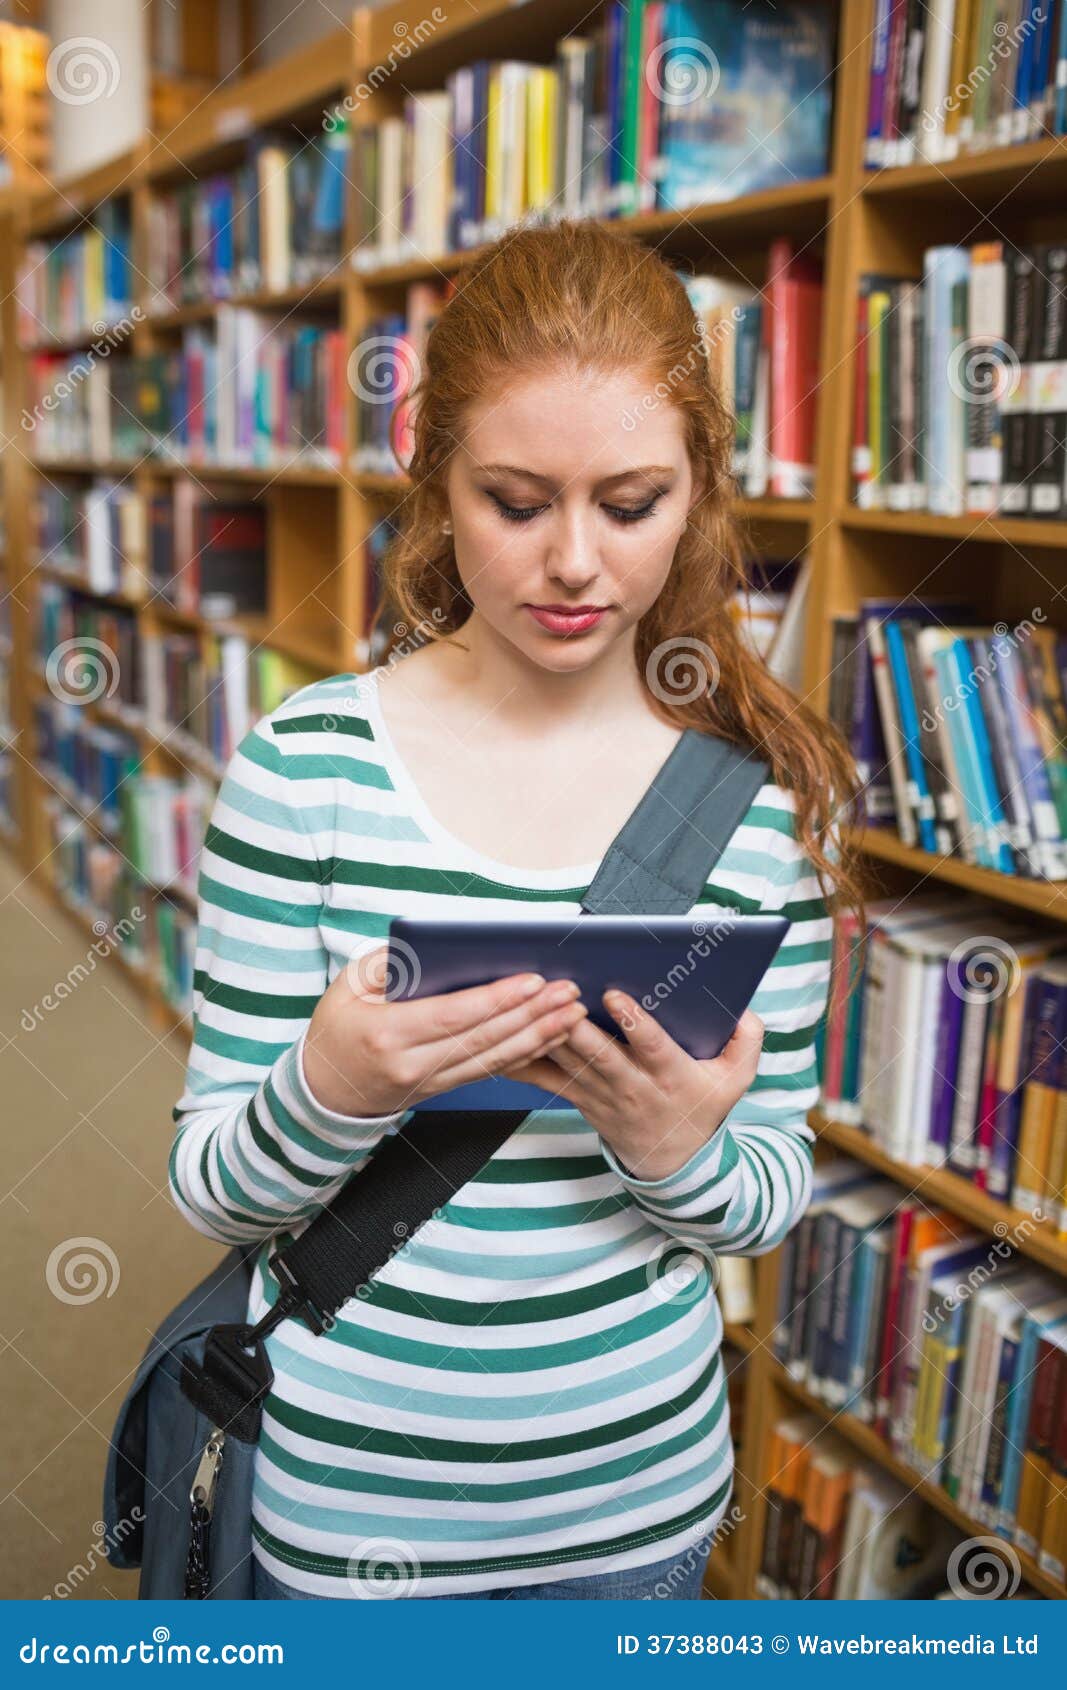 redhead student using tablet standing in library